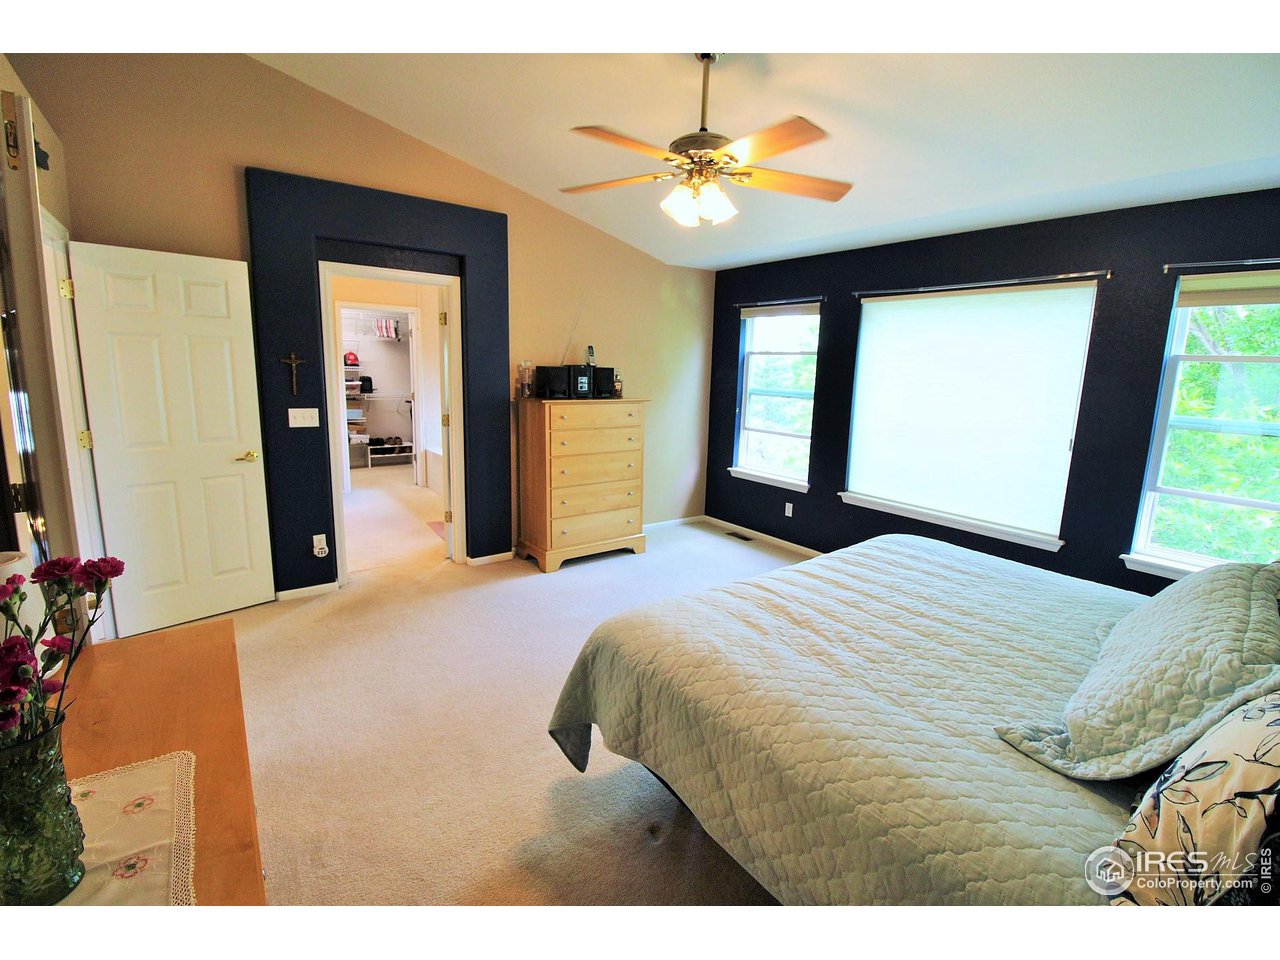 Private master suite is on the back of the house with good separation from the secondary bedrooms.